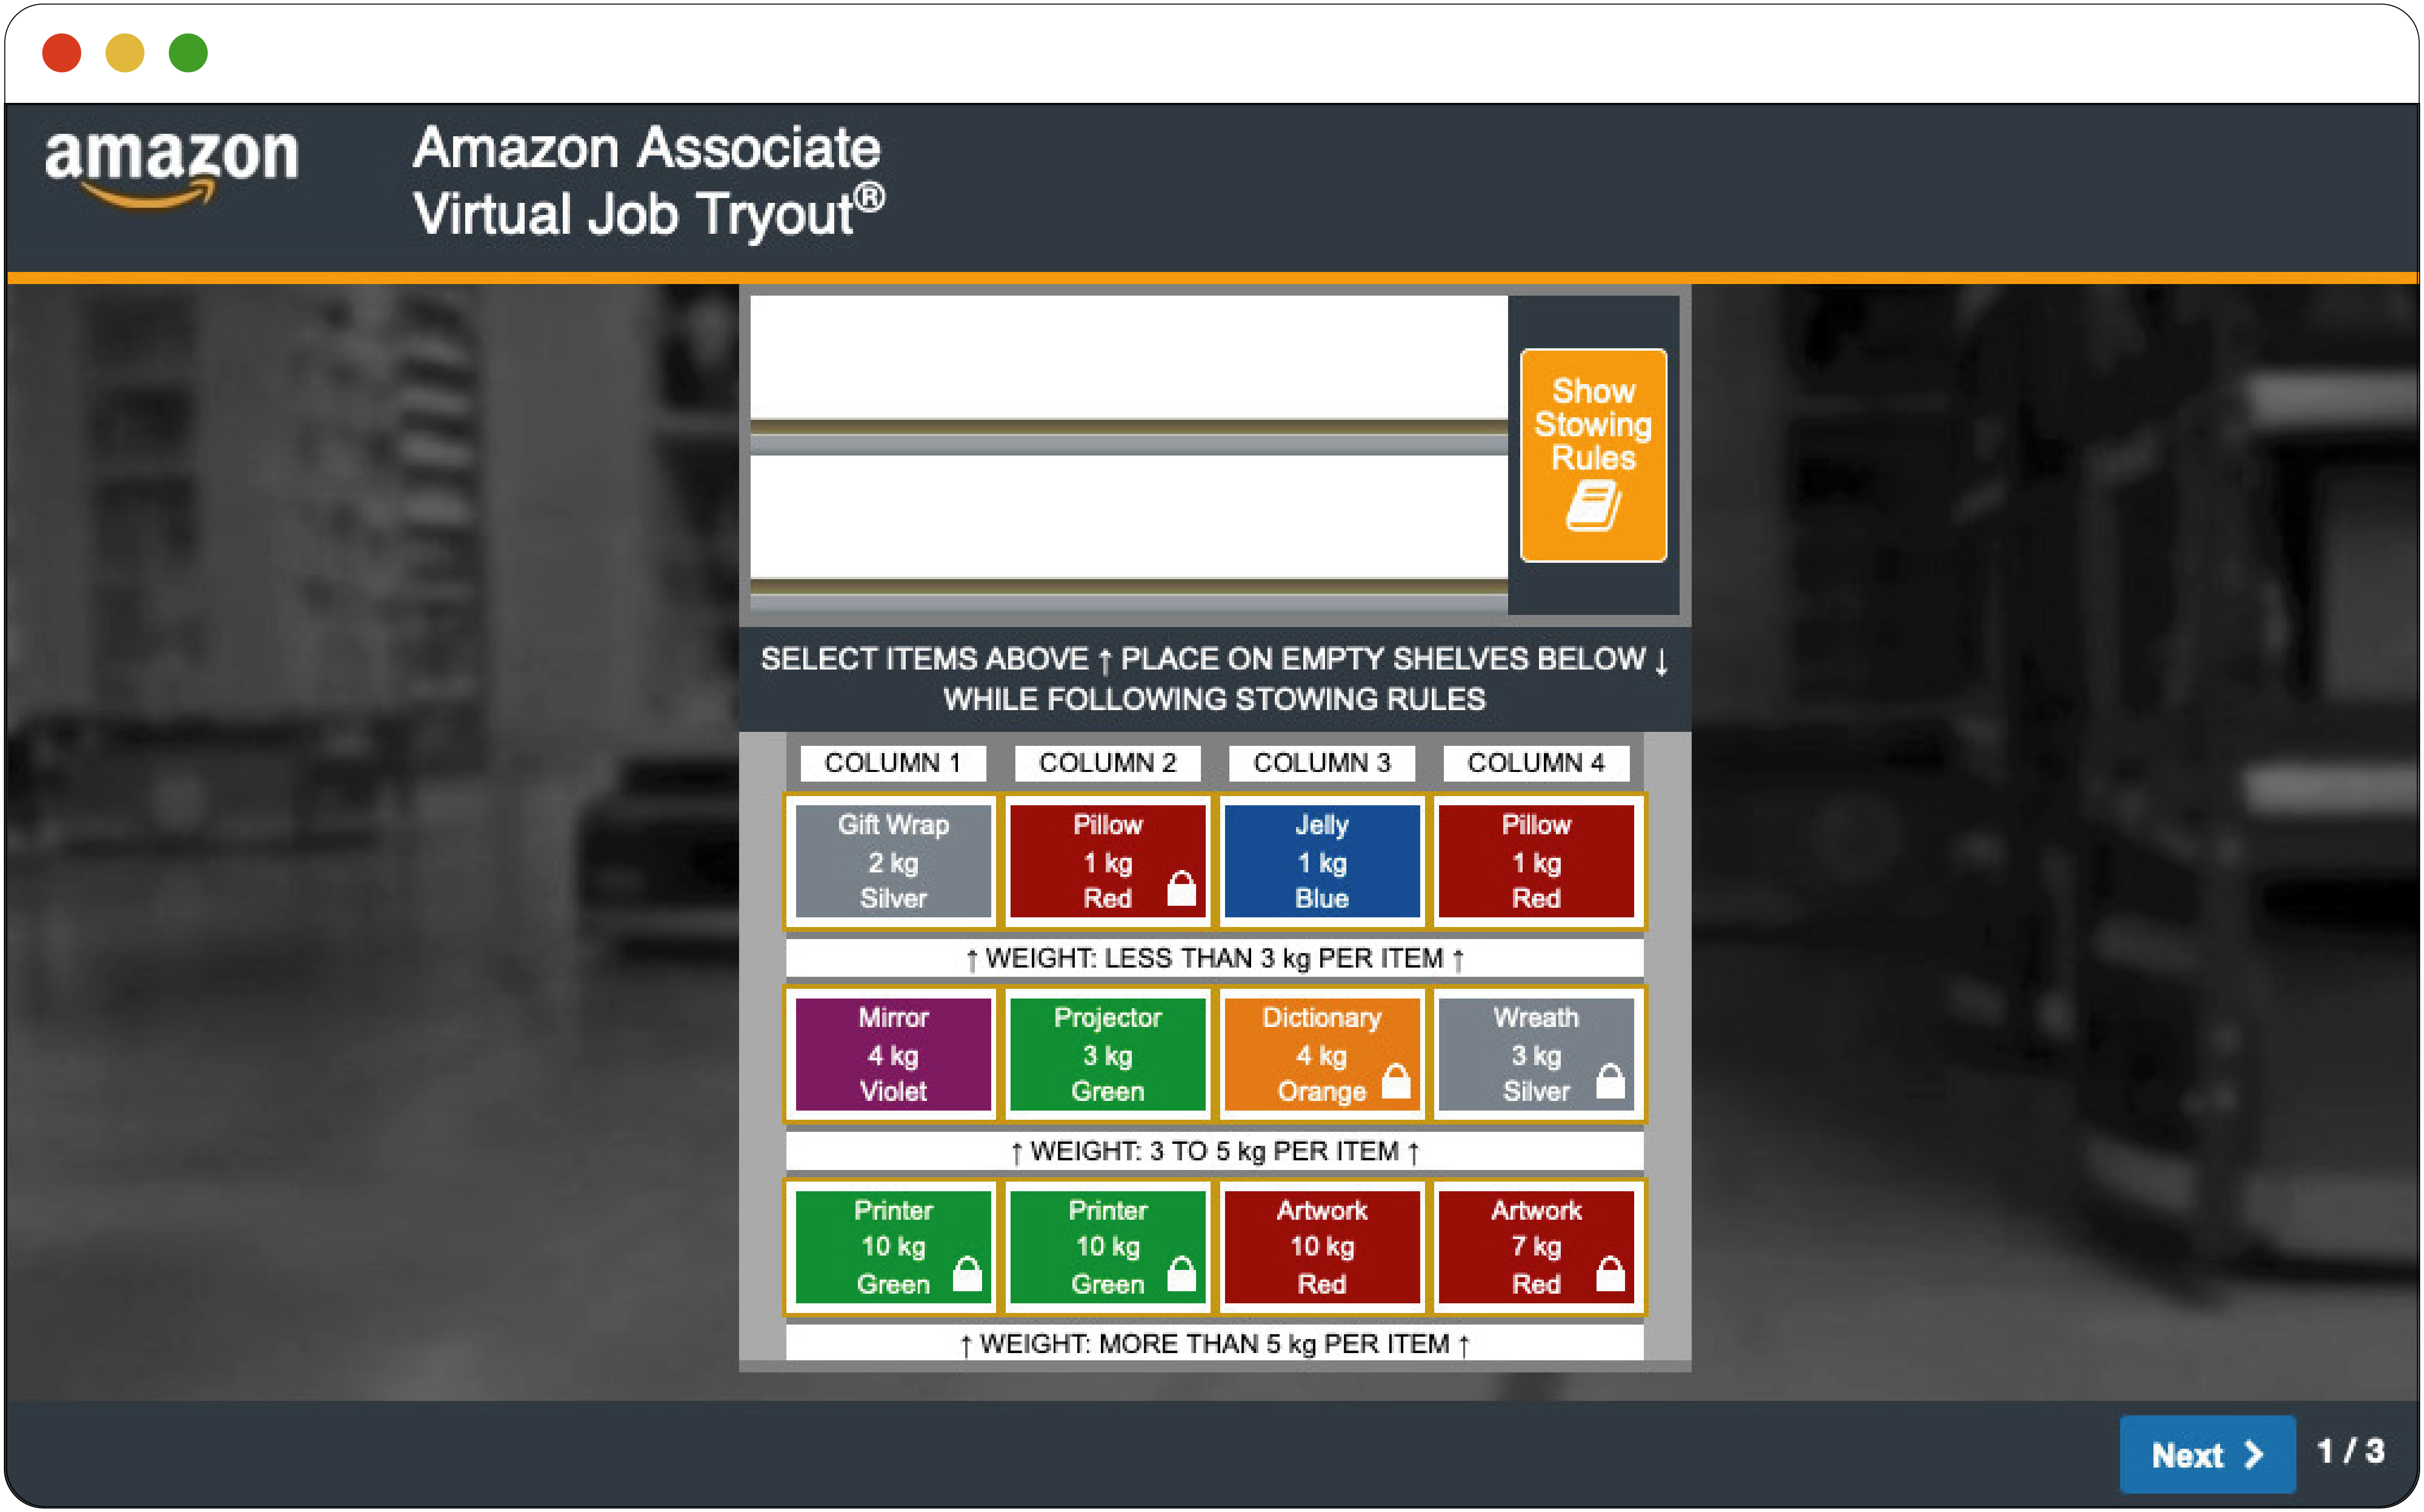 This figure shows an excerpt from Amazon’s “Stow Pro” assessment. It depicts three rows of “packages” of varying colors, with weights and items listed on them (e.g., “Projector; 3kg; Red.” The directions read “Select items above, place on empty shelves below, while following the stowing rules.” There is an orange icon titled “Stowing Rules” where candidates can access the rules to follow for the activity.